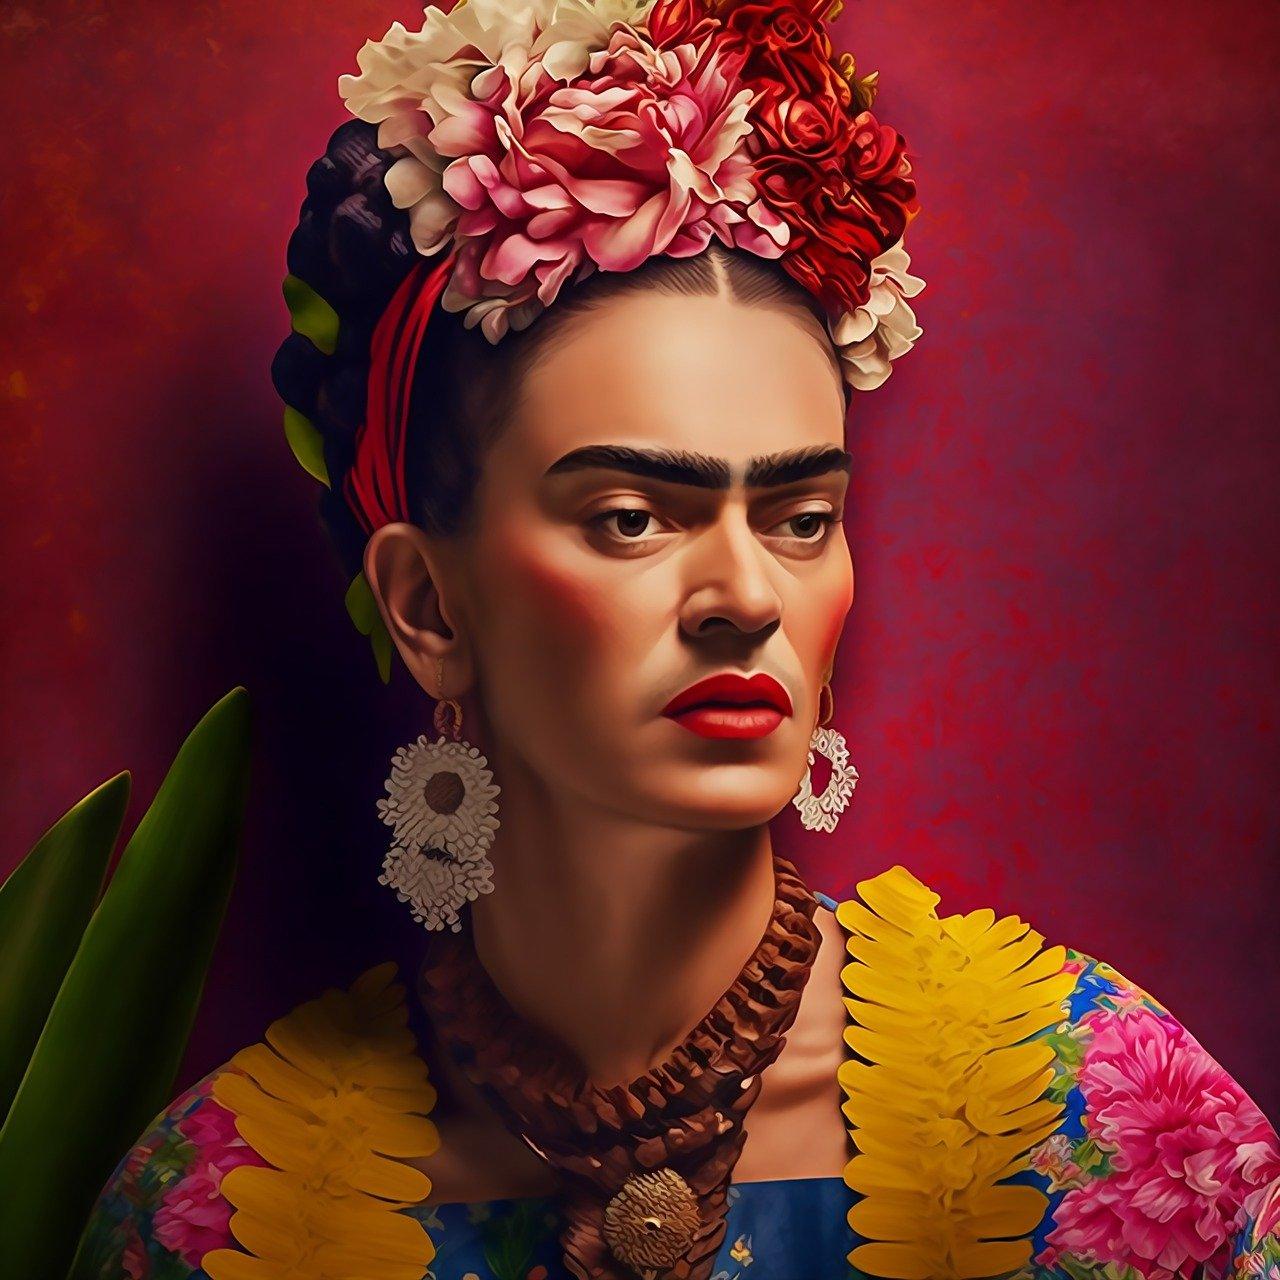 How is Frida Kahlo remembered today? 